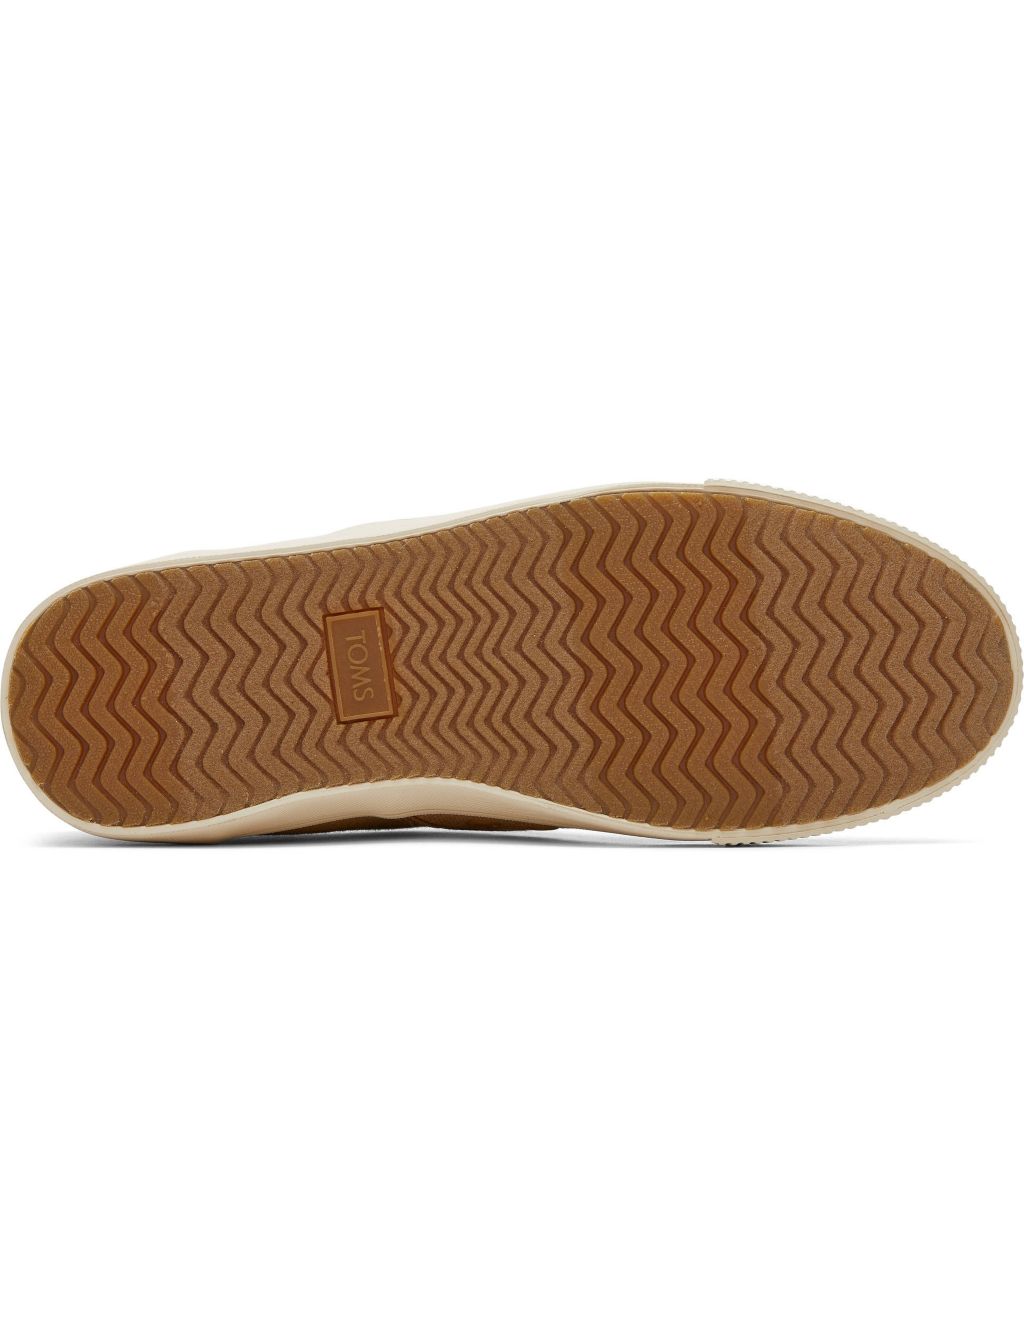 Canvas Slip-On Trainers image 6